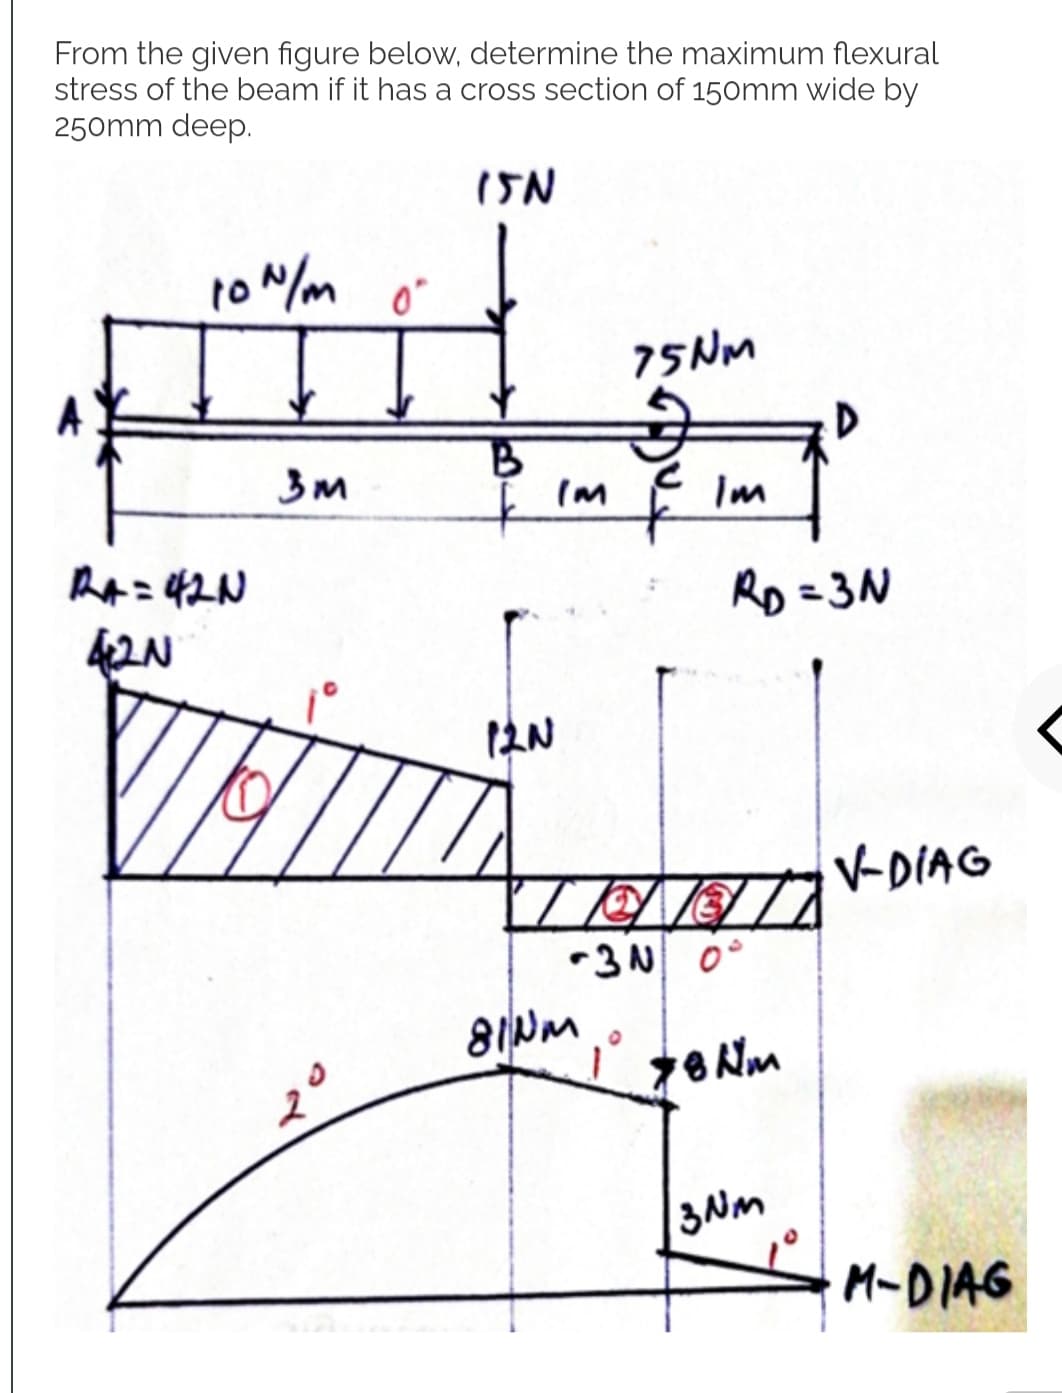 From the given figure below, determine the maximum flexural
stress of the beam if it has a cross section of 150mm wide by
250mm deep.
(JN
10 N/m o'
RA=42N
42N
3M
B
IM
75Nm
81NM
Im
RD=3N
-3N 0°
78 Nm
3NM
V-DIAG
M-DIAG